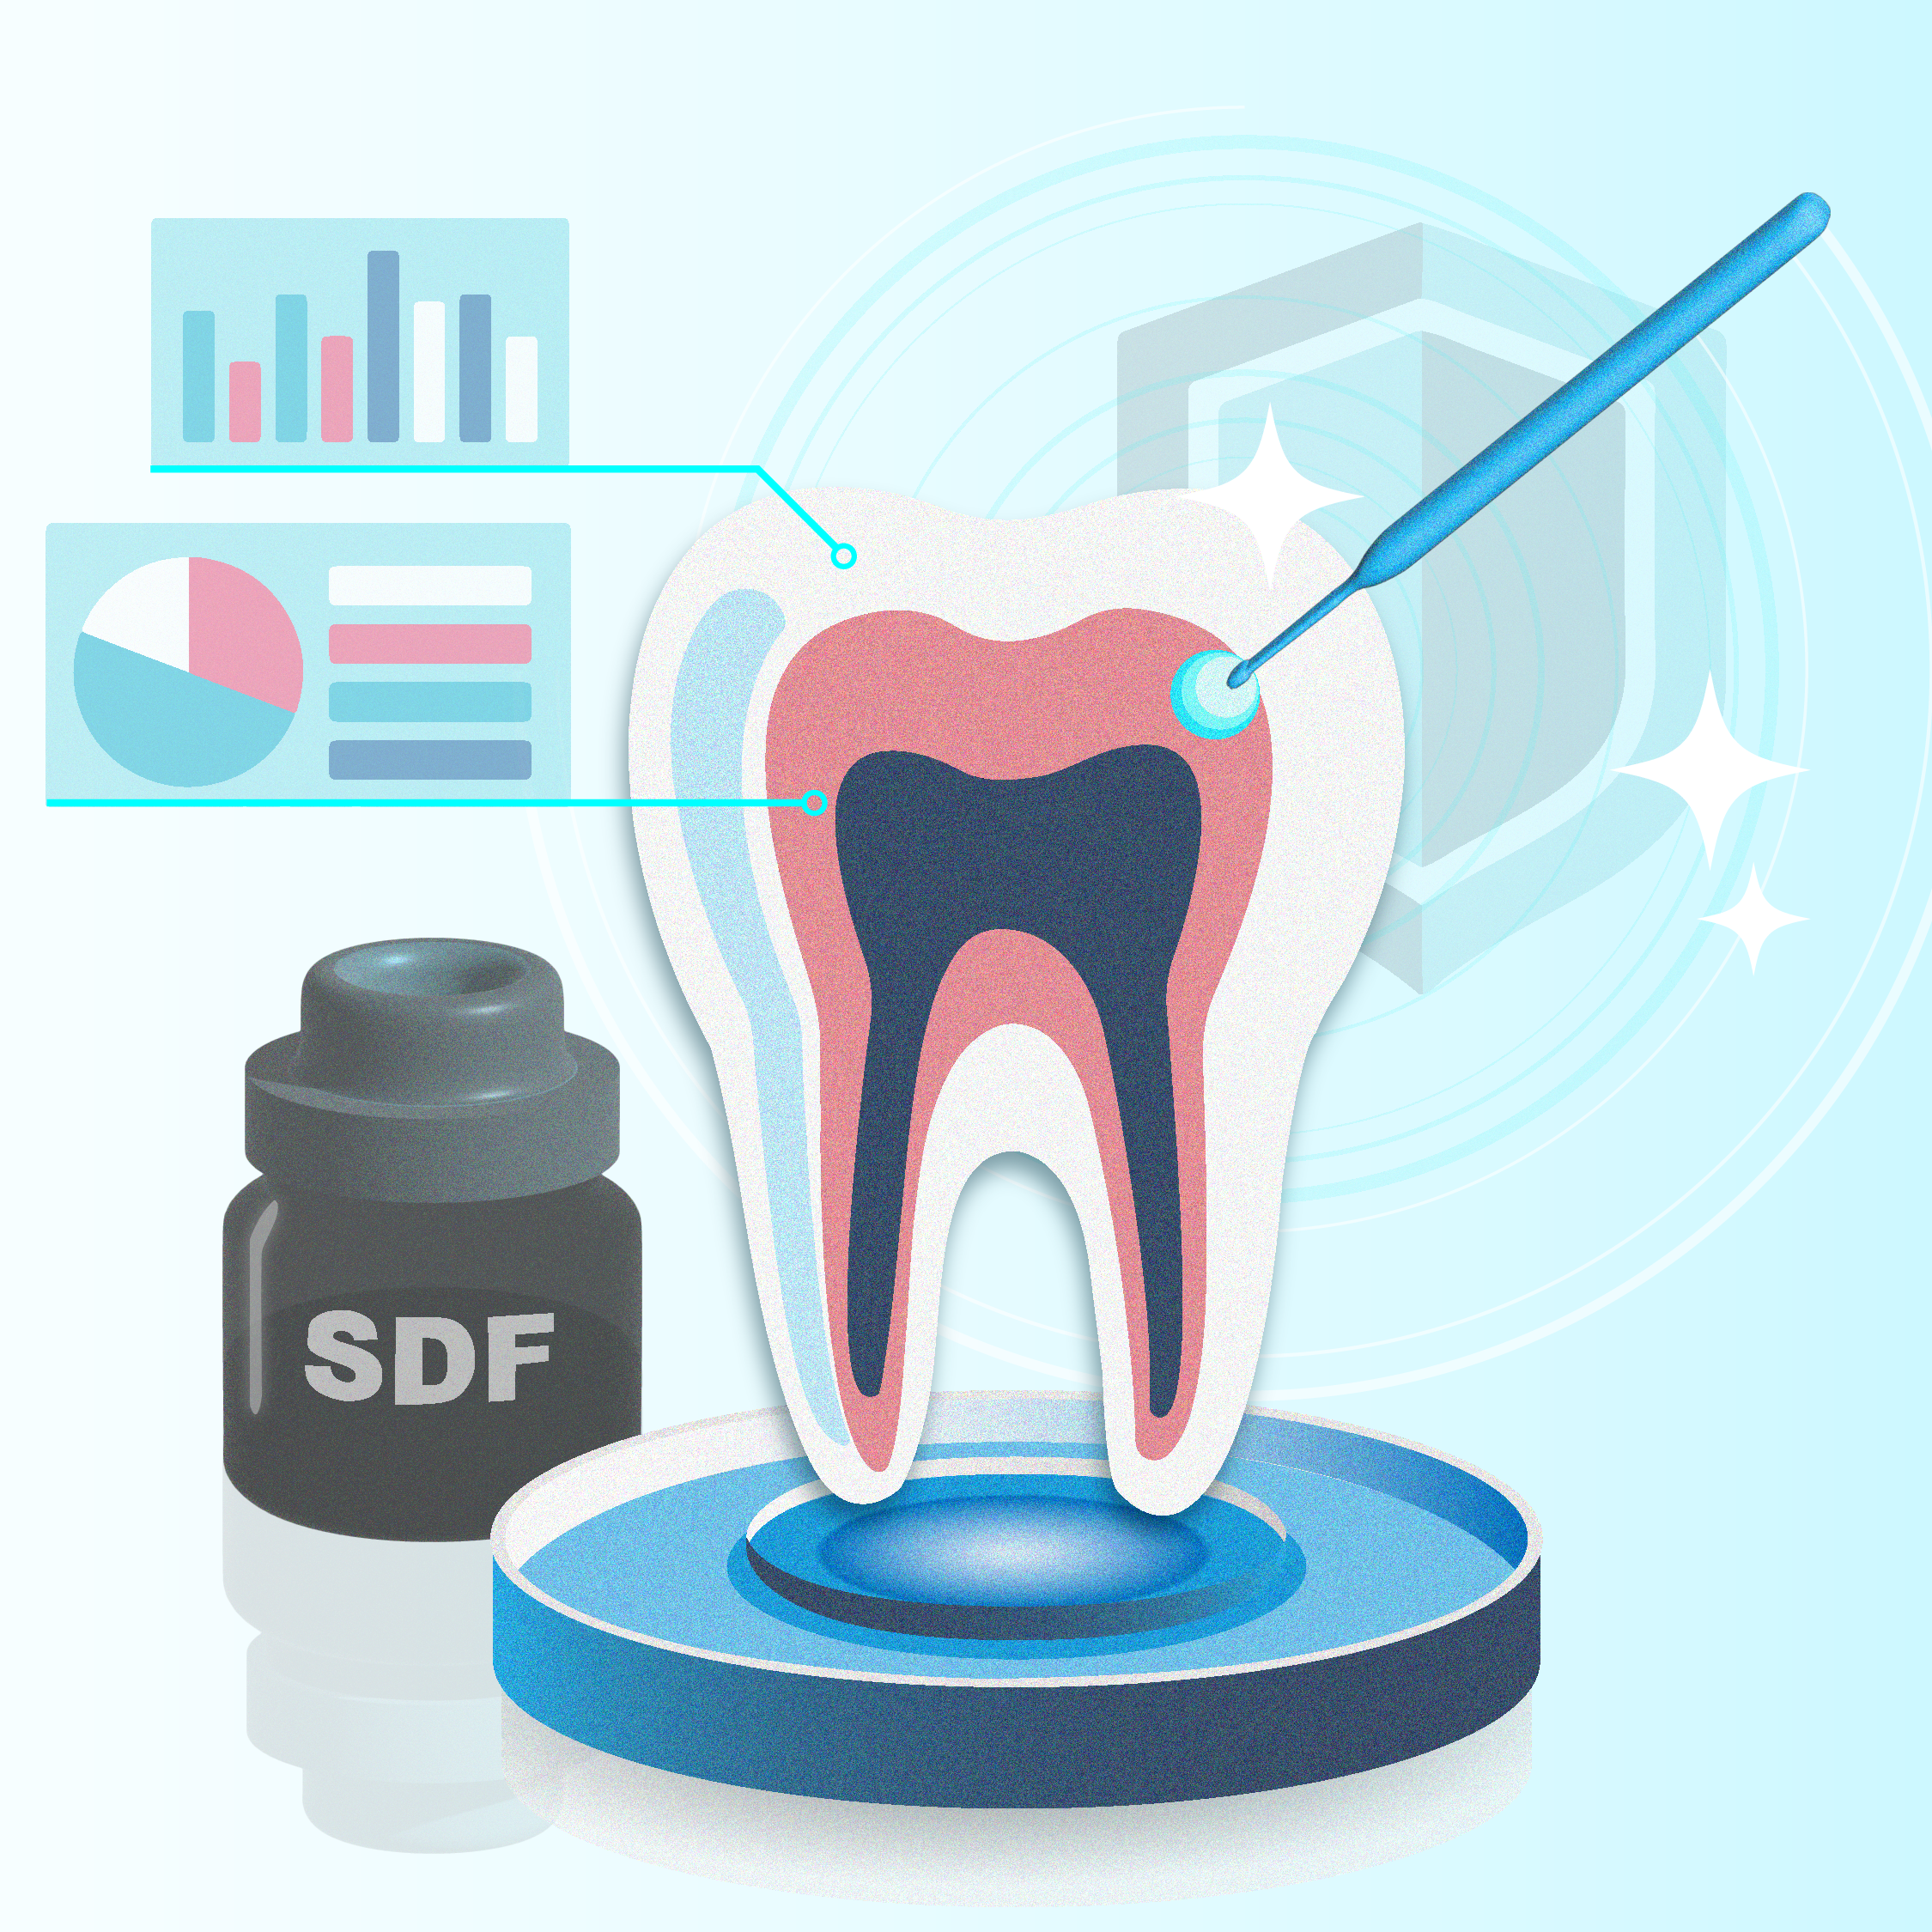 Illustration of a tooth with a bottle and applicator for Silver Diamine Fluoride with SDF being applied to the tooth. 